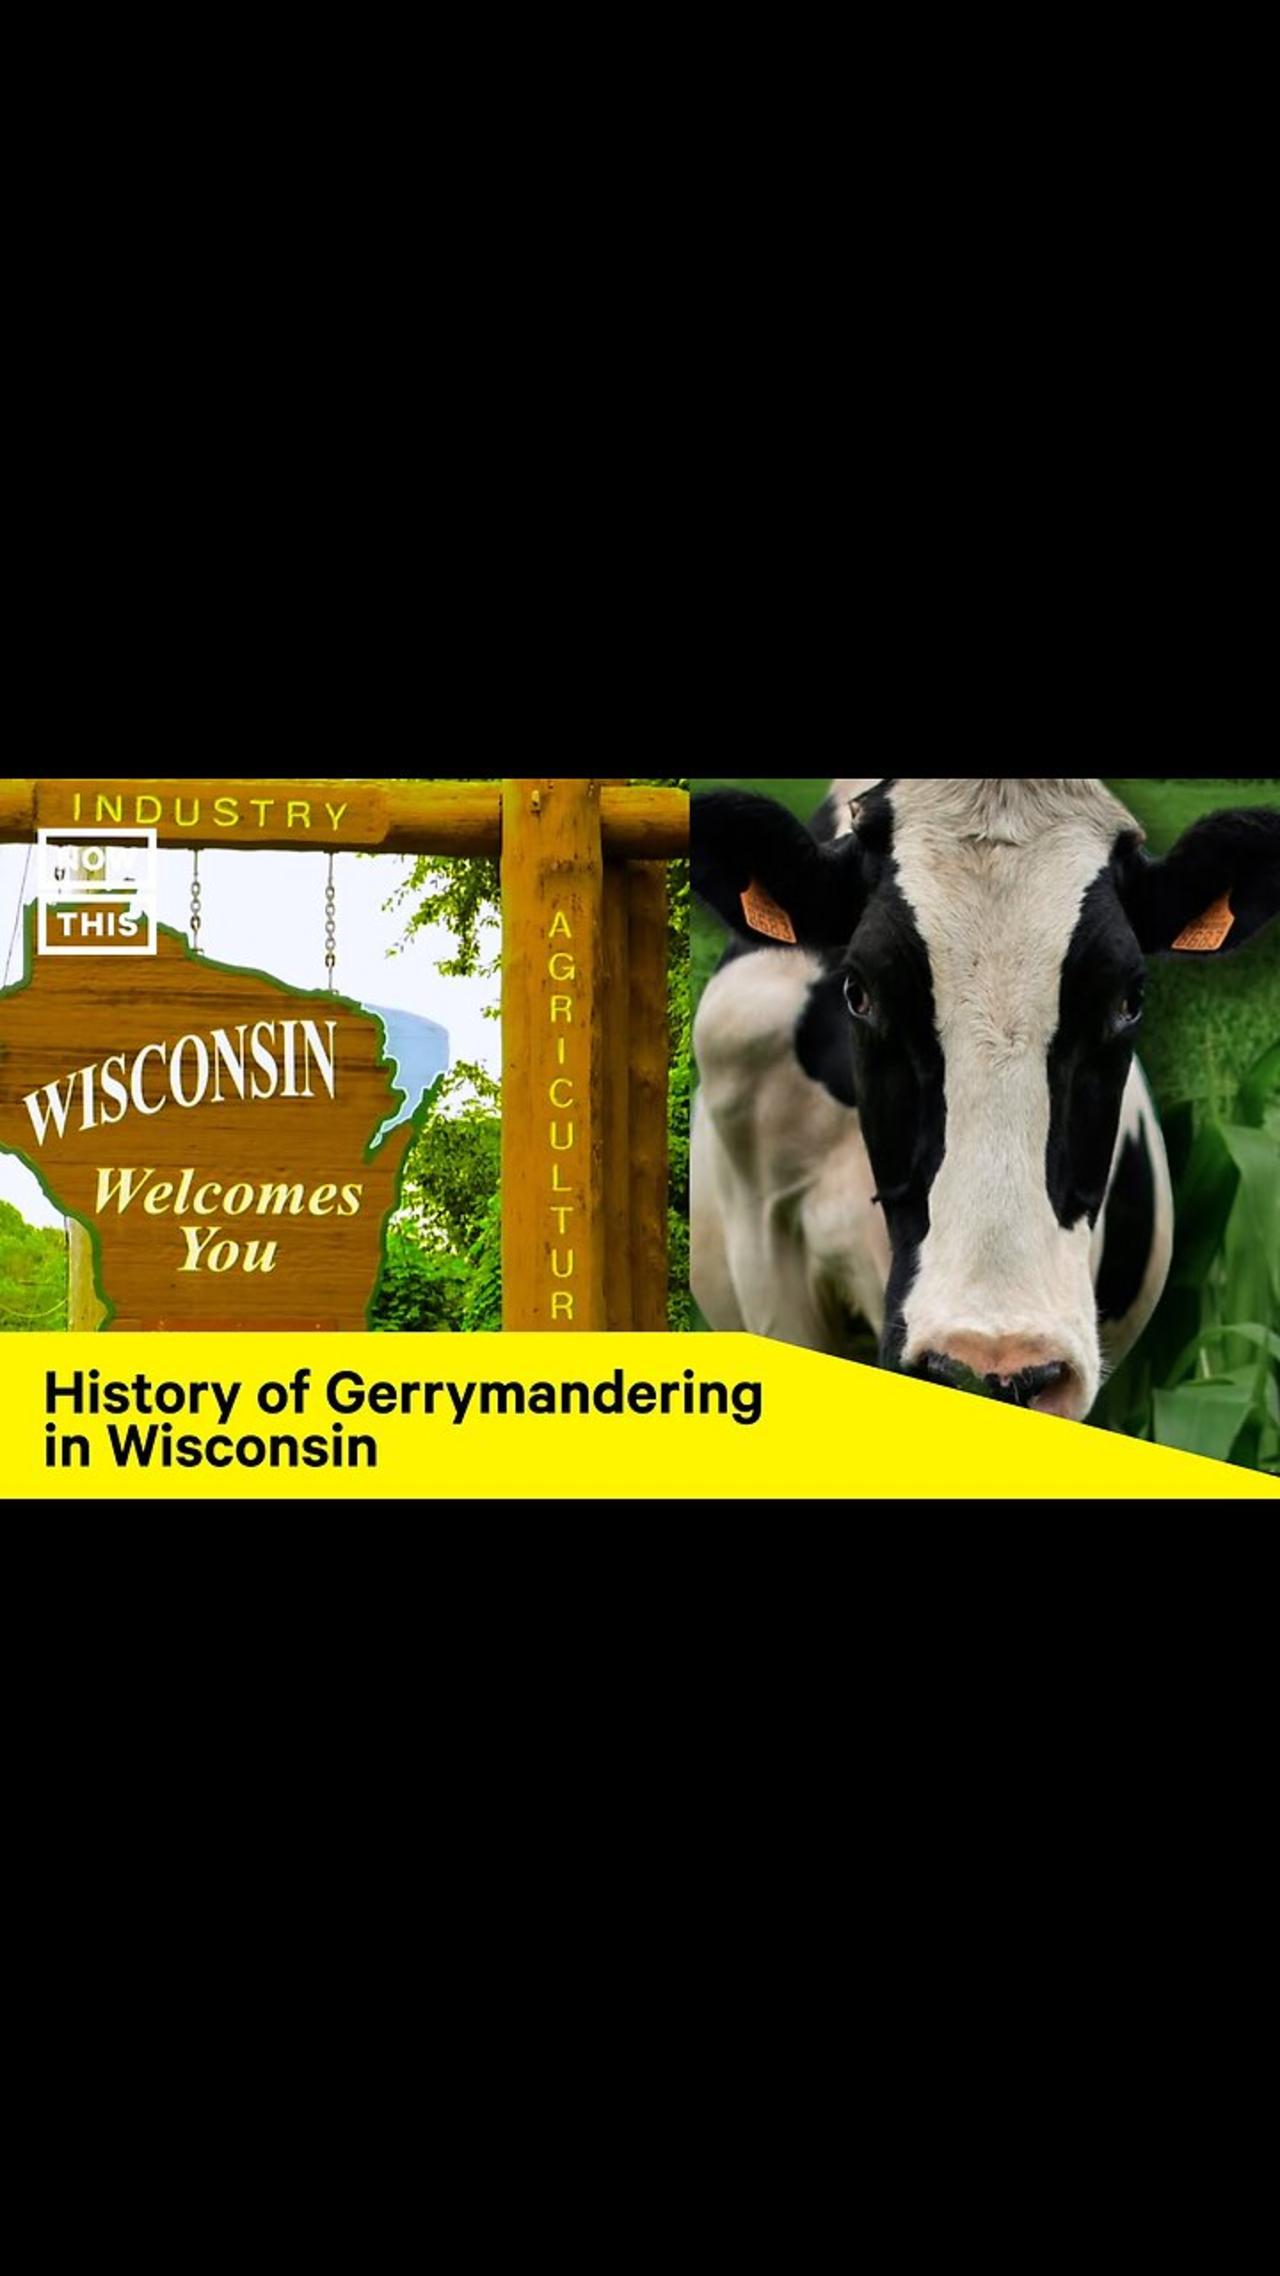 The History of Gerrymandering in Wisconsin